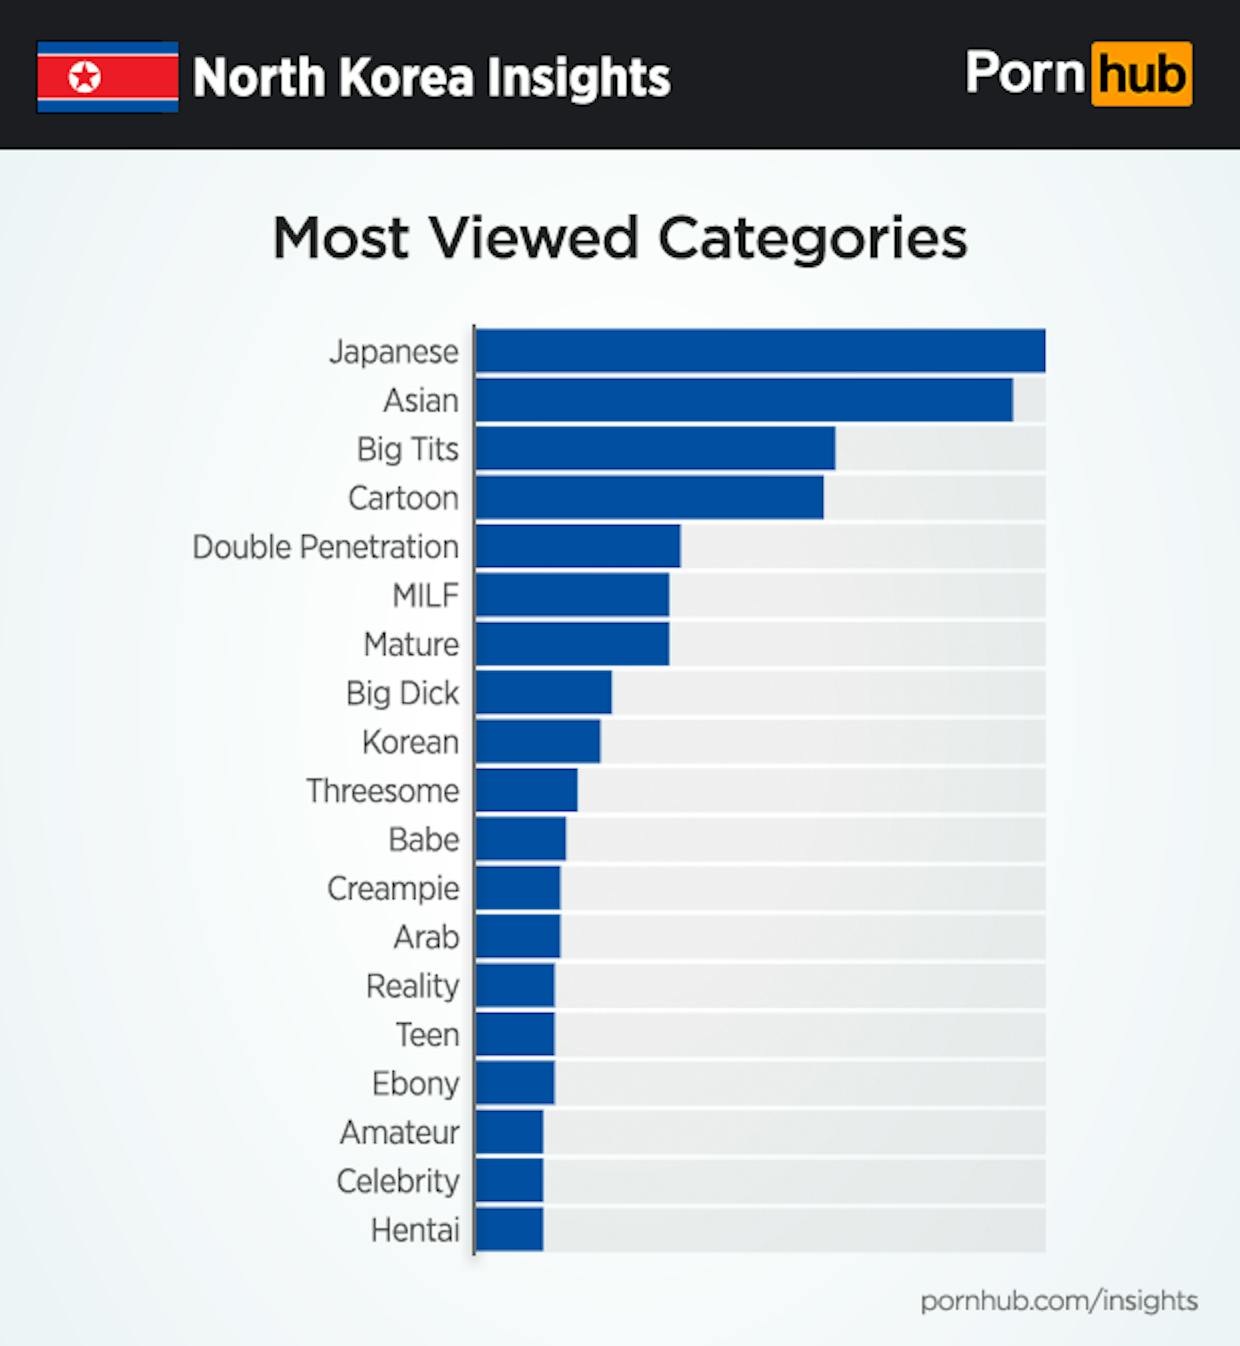 Banned Korean Porn - Pornhub Just Released New Data on What North Koreans Watch ...